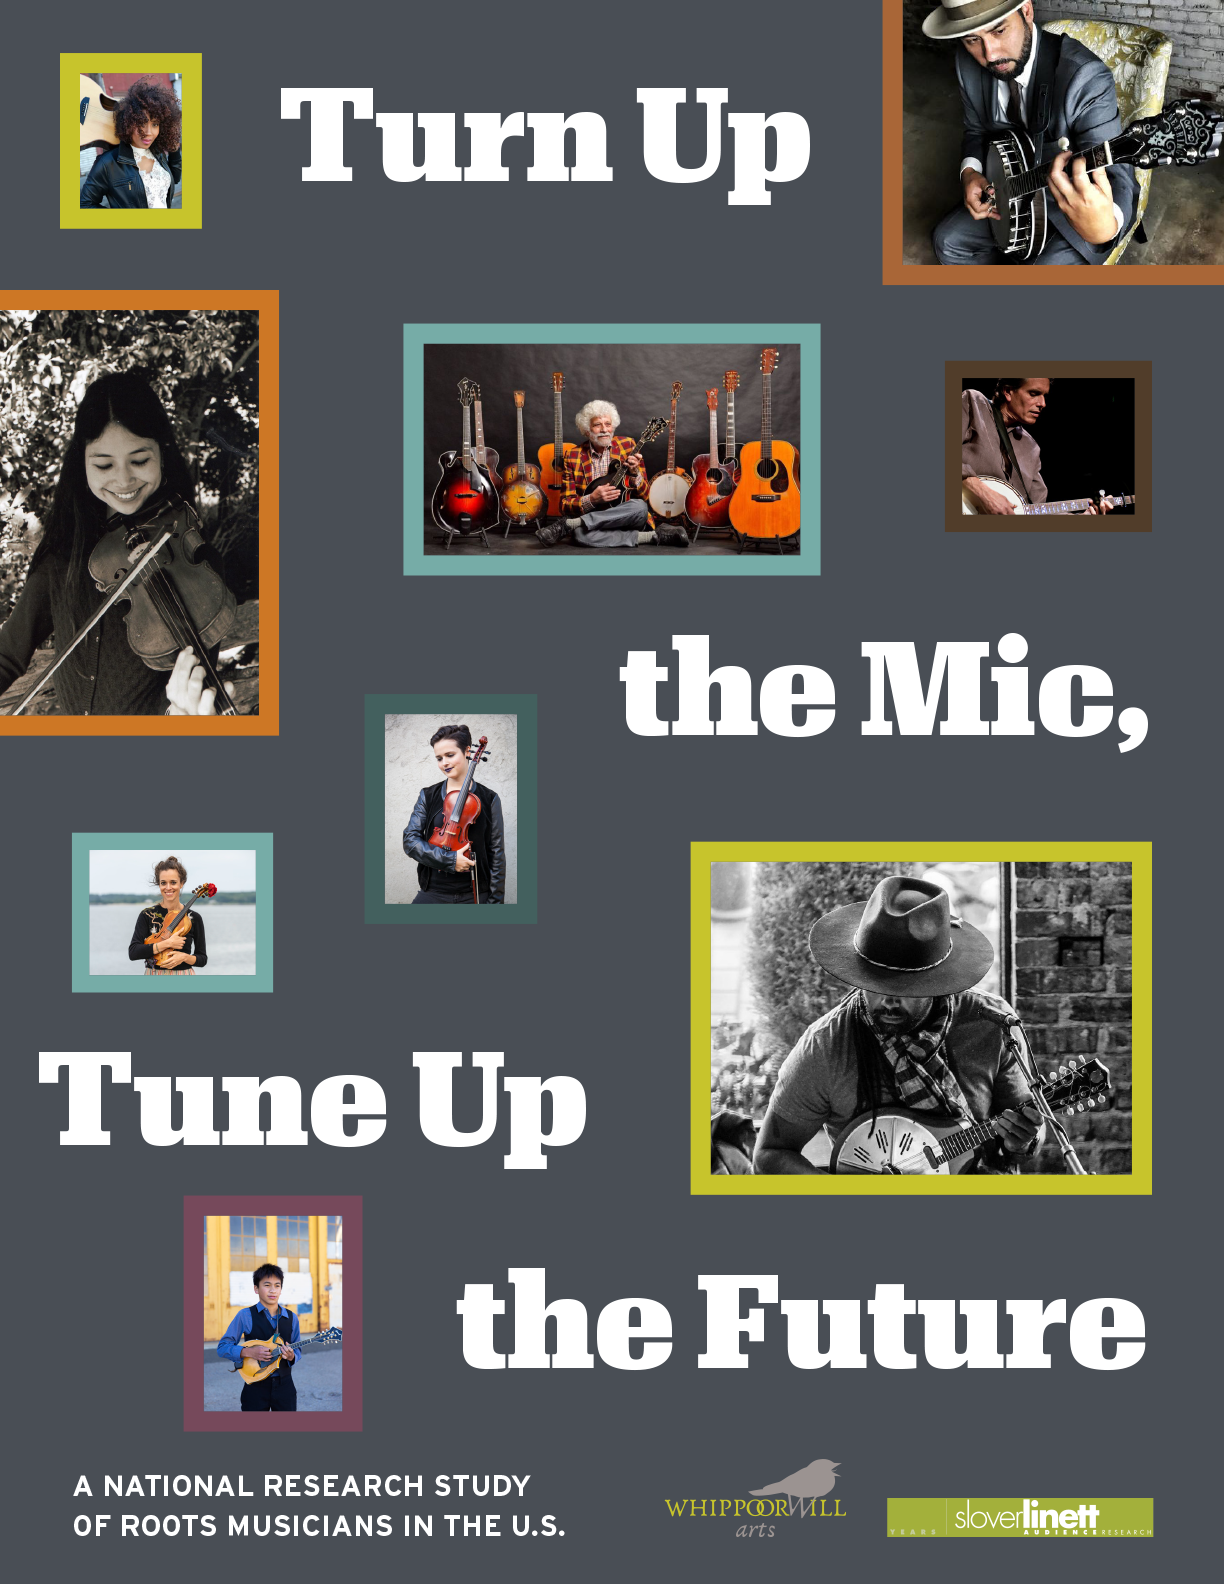 1-UPDATE Turn Up the Mic report - Findings from a 2021 national survey of roots musicians - Whippoorwill Arts and Slover Linett-1.png